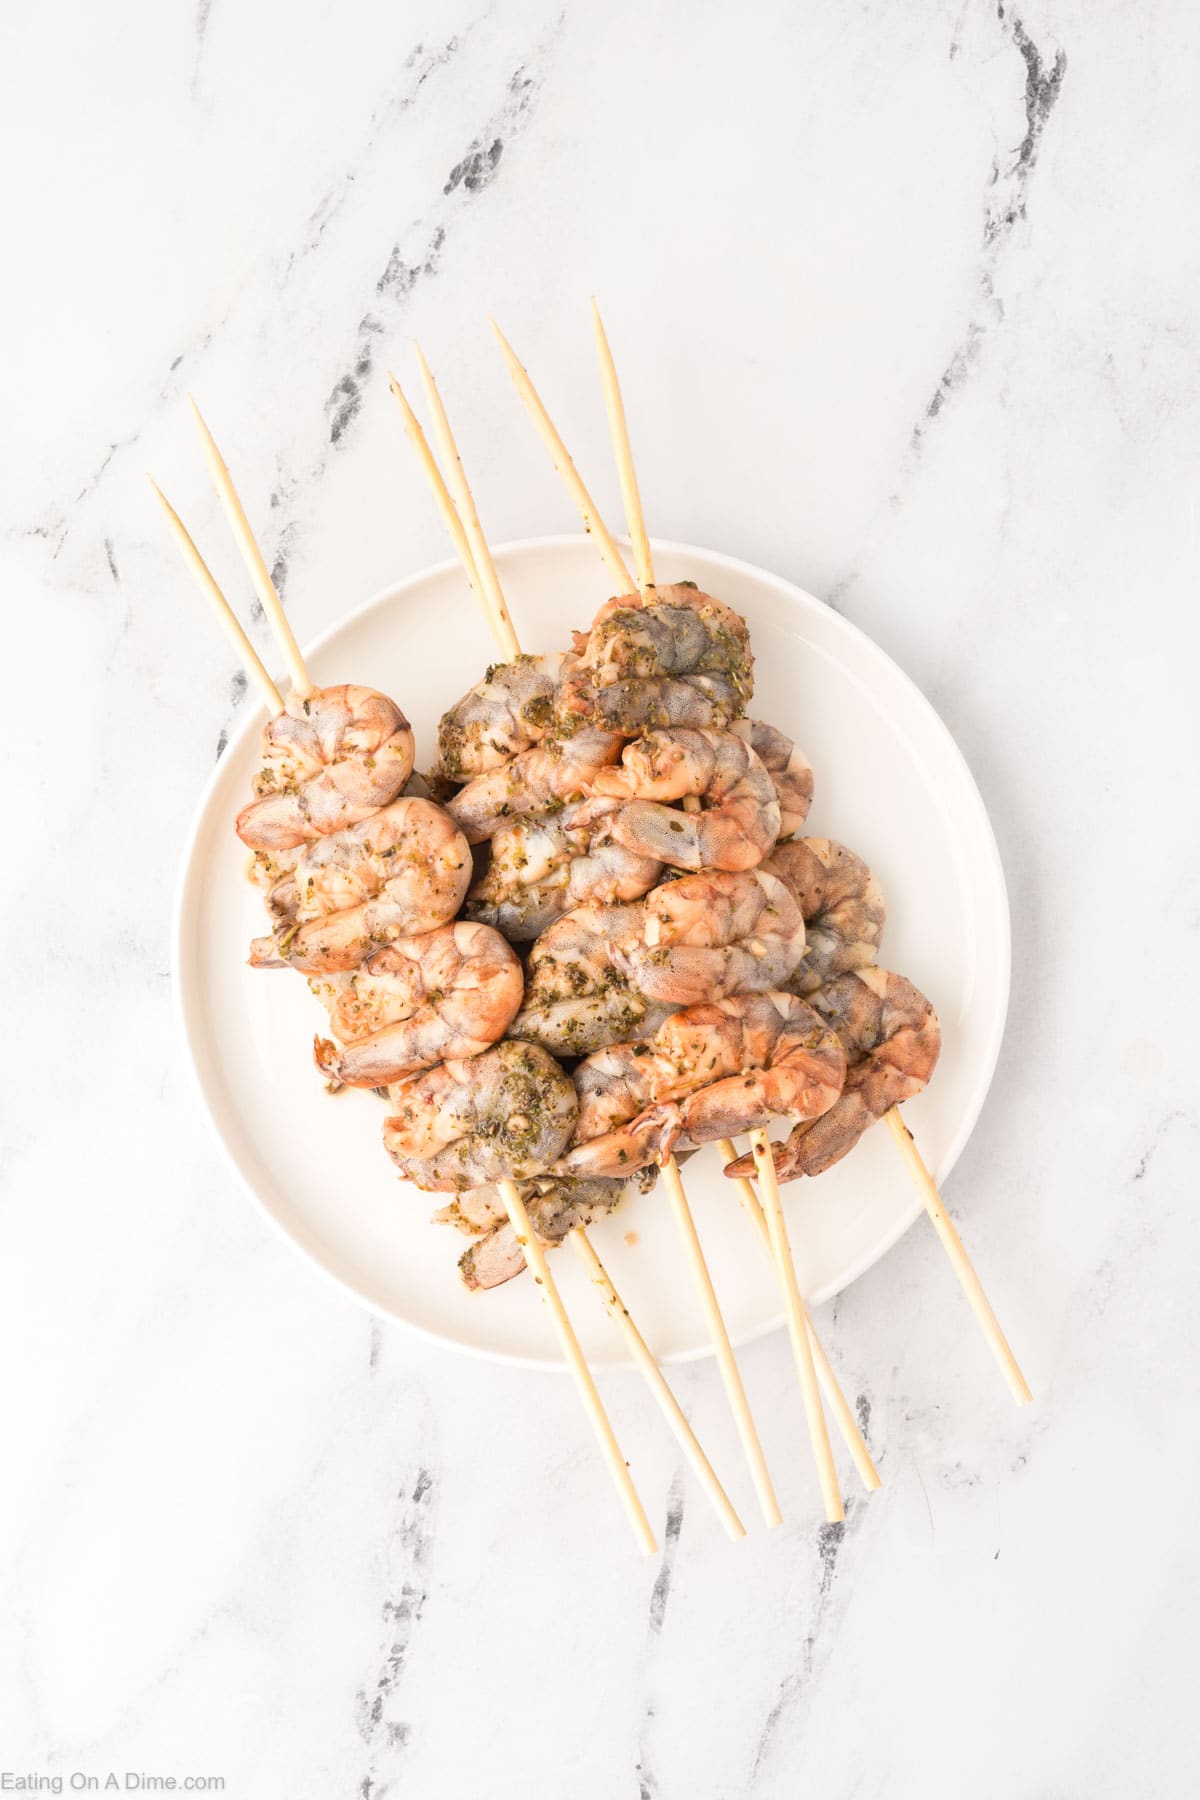 Marinated shrimp skewers on a plate